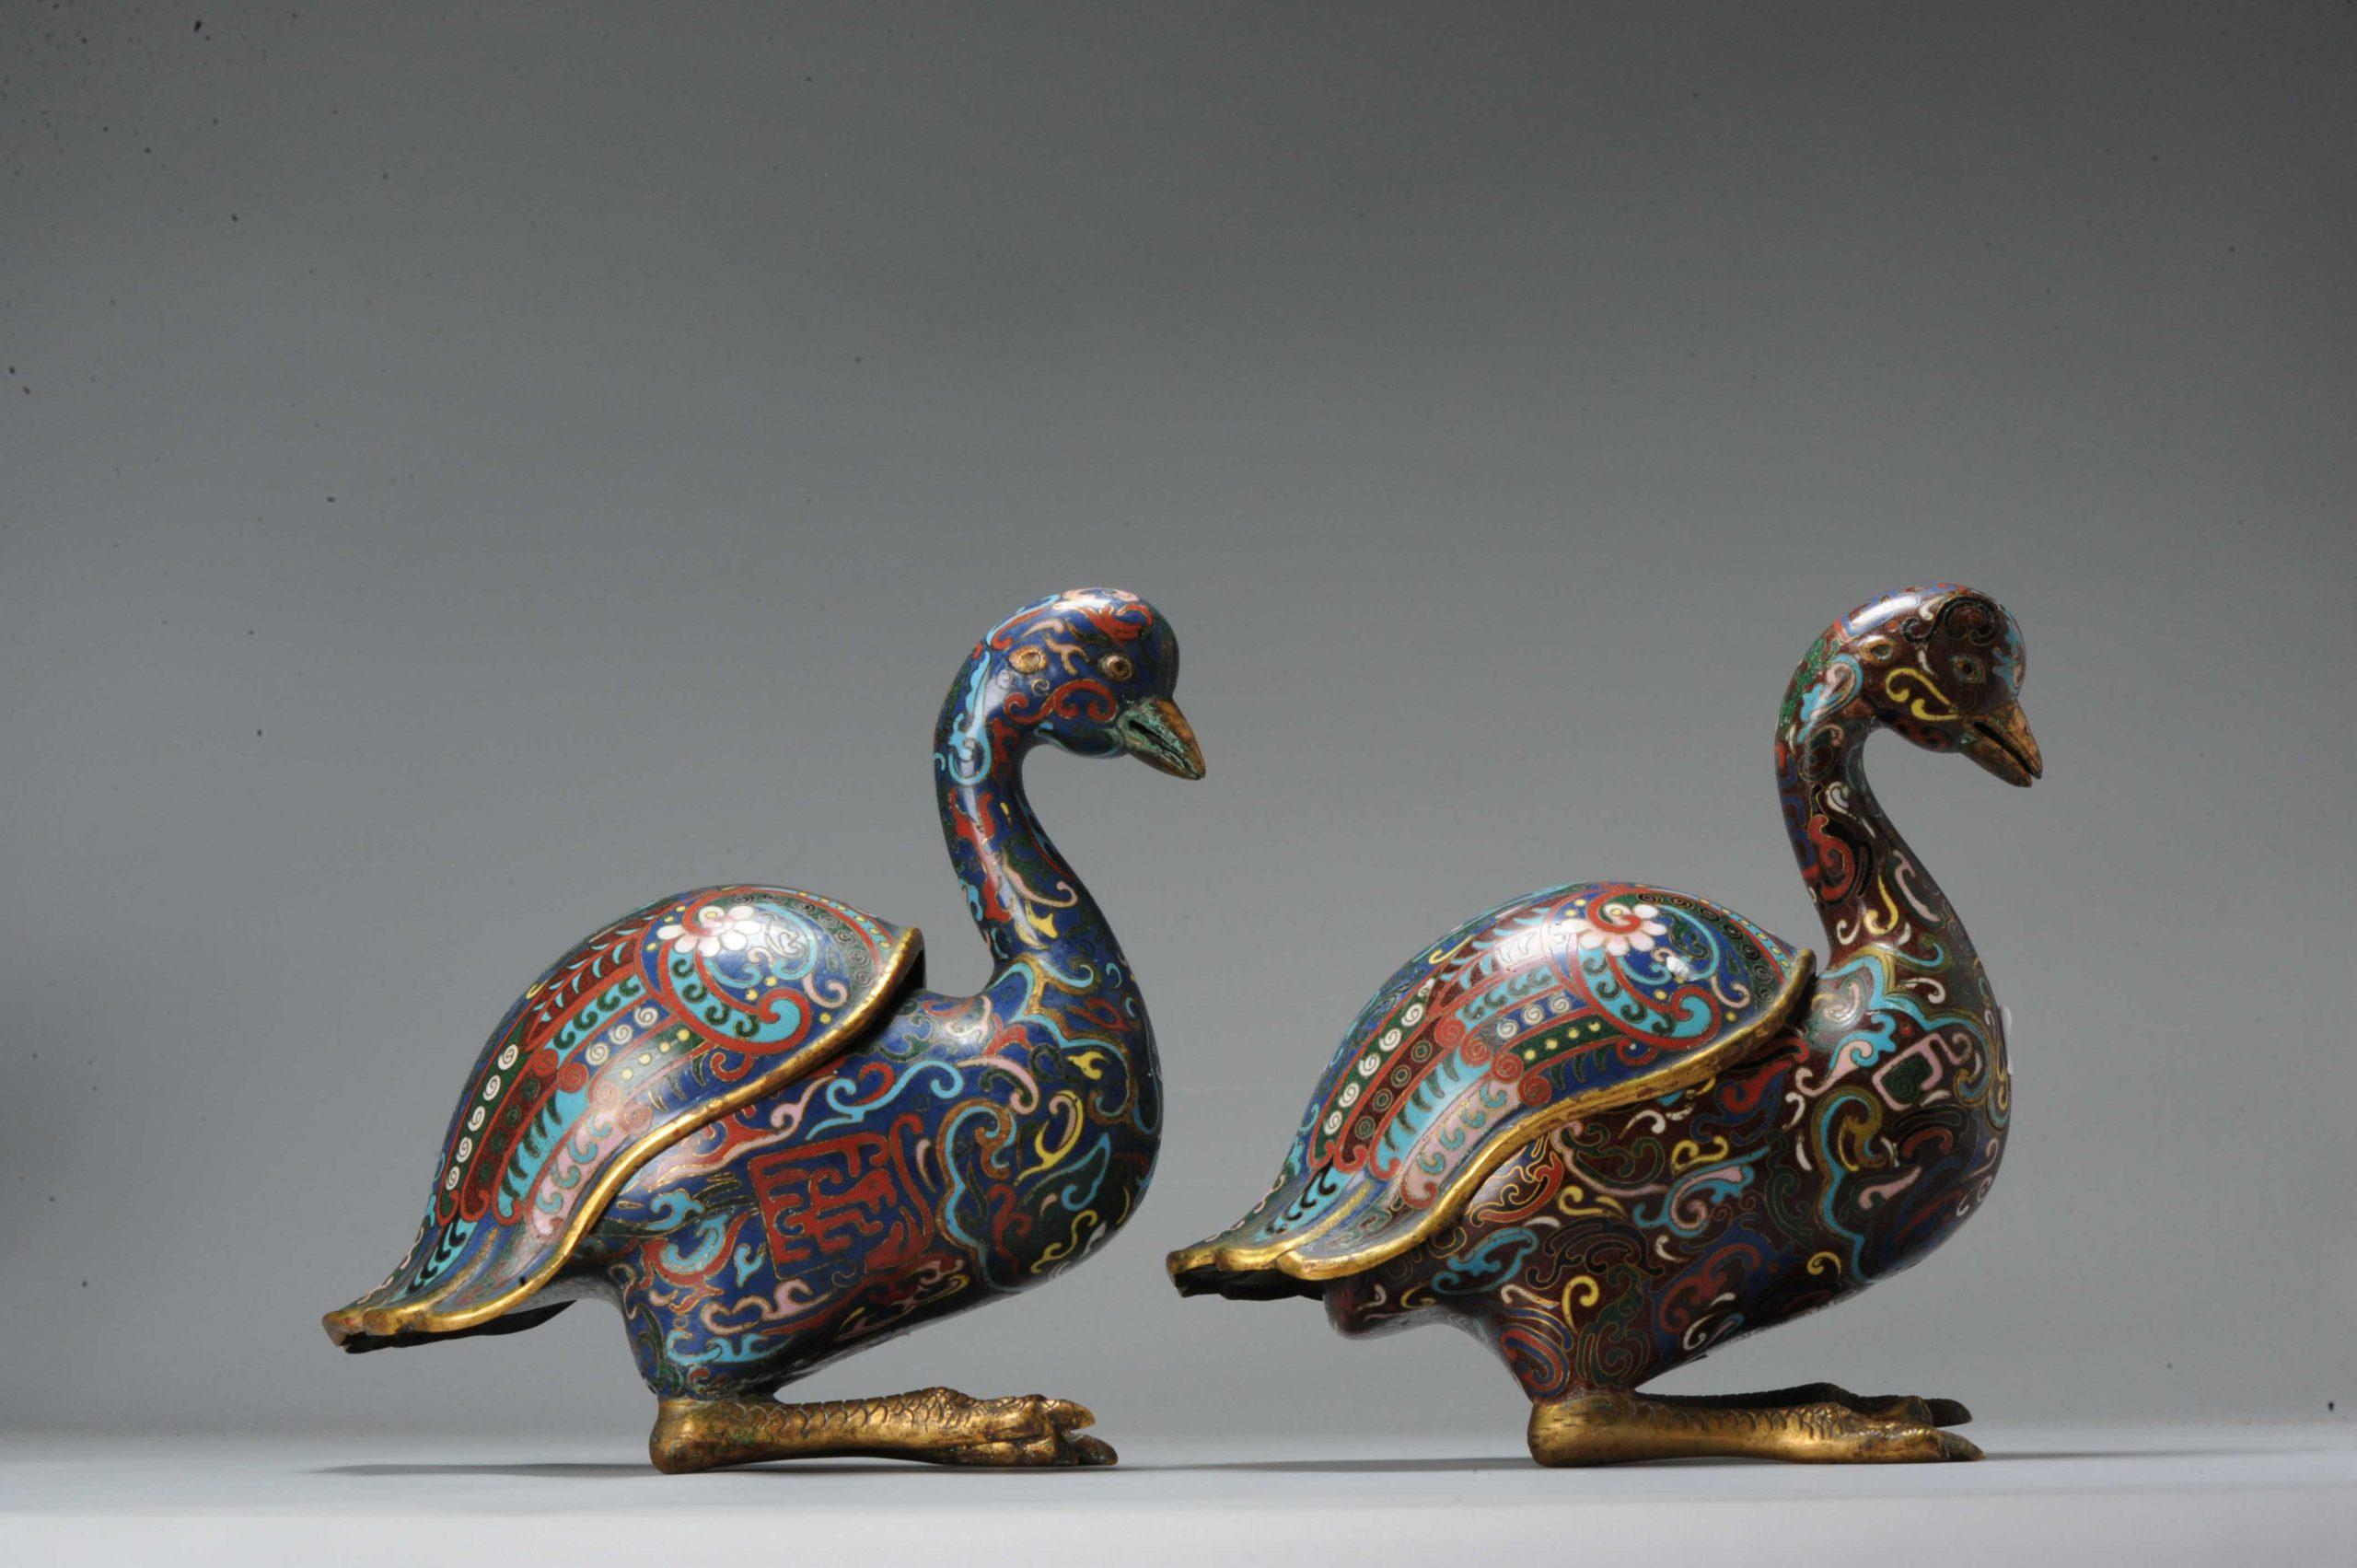 18th Century and Earlier Antique Bronze / Copper Cloisonné Burner Inscense Koro Geese or Swan For Sale